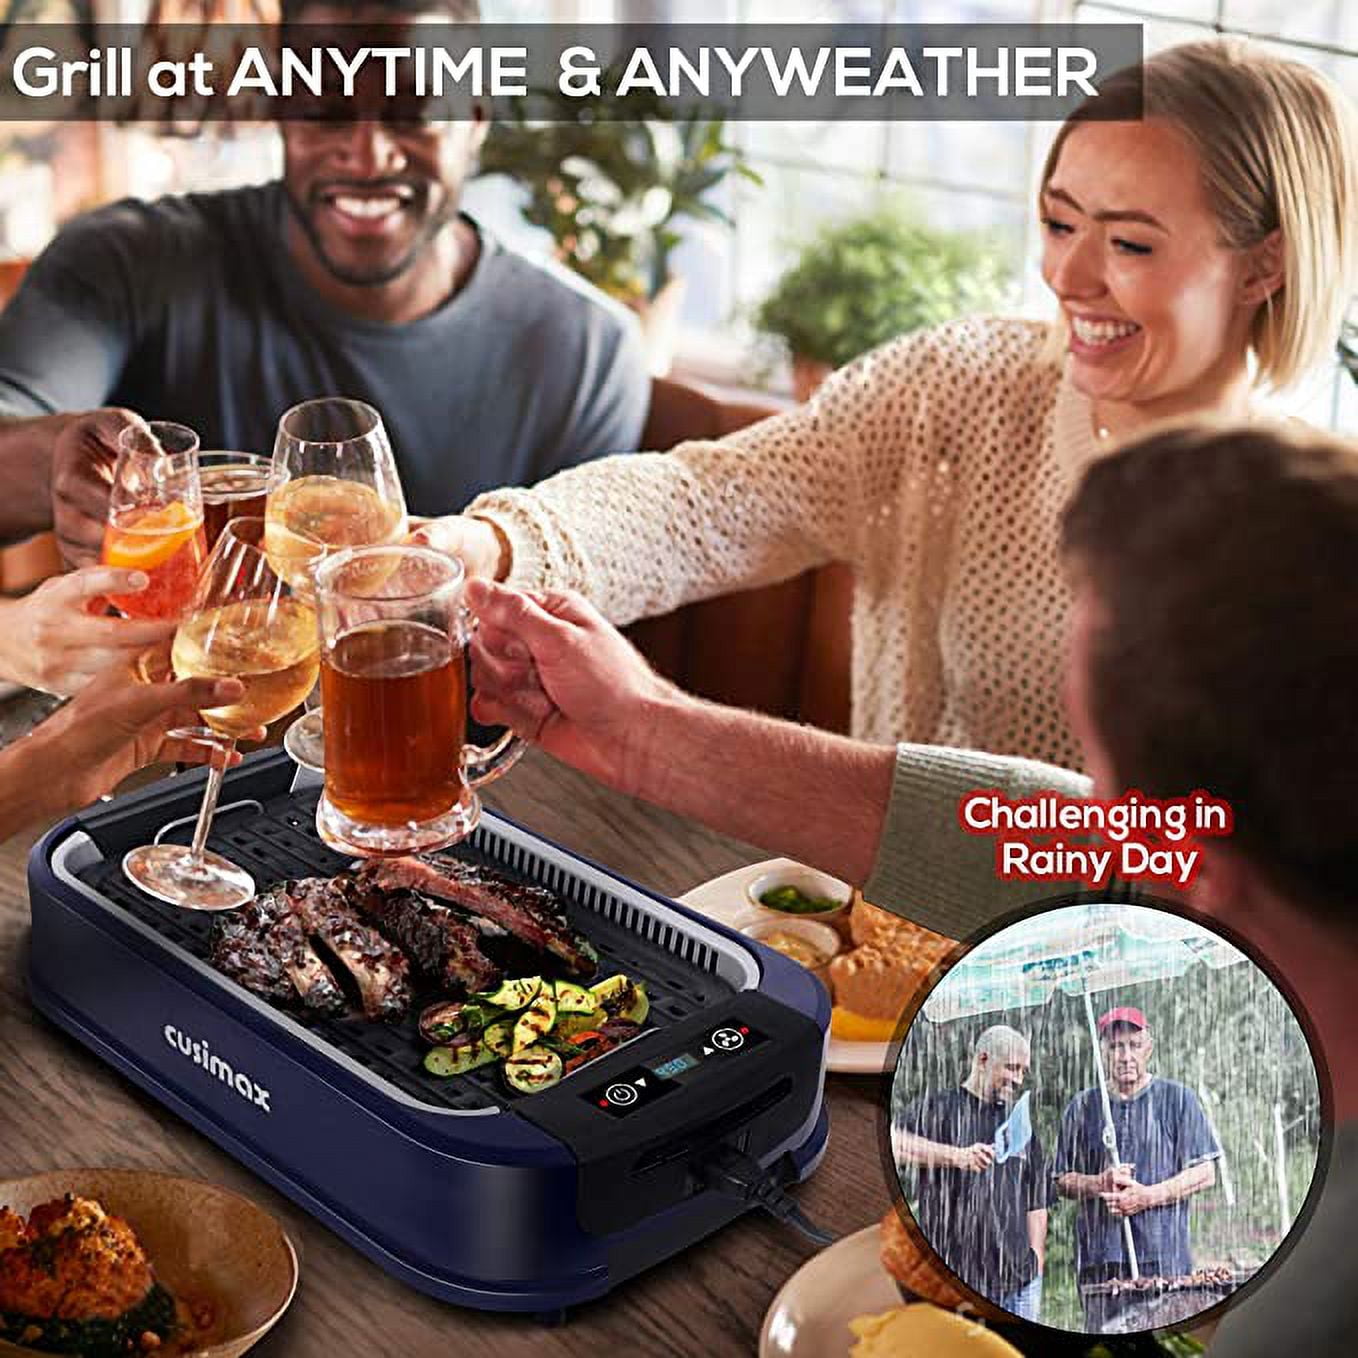 Cusimax Smokeless Grill Indoor Grill Electric Grill Griddle with Tempered  Glass Lid and Turbo Smoke Extractor Technology 